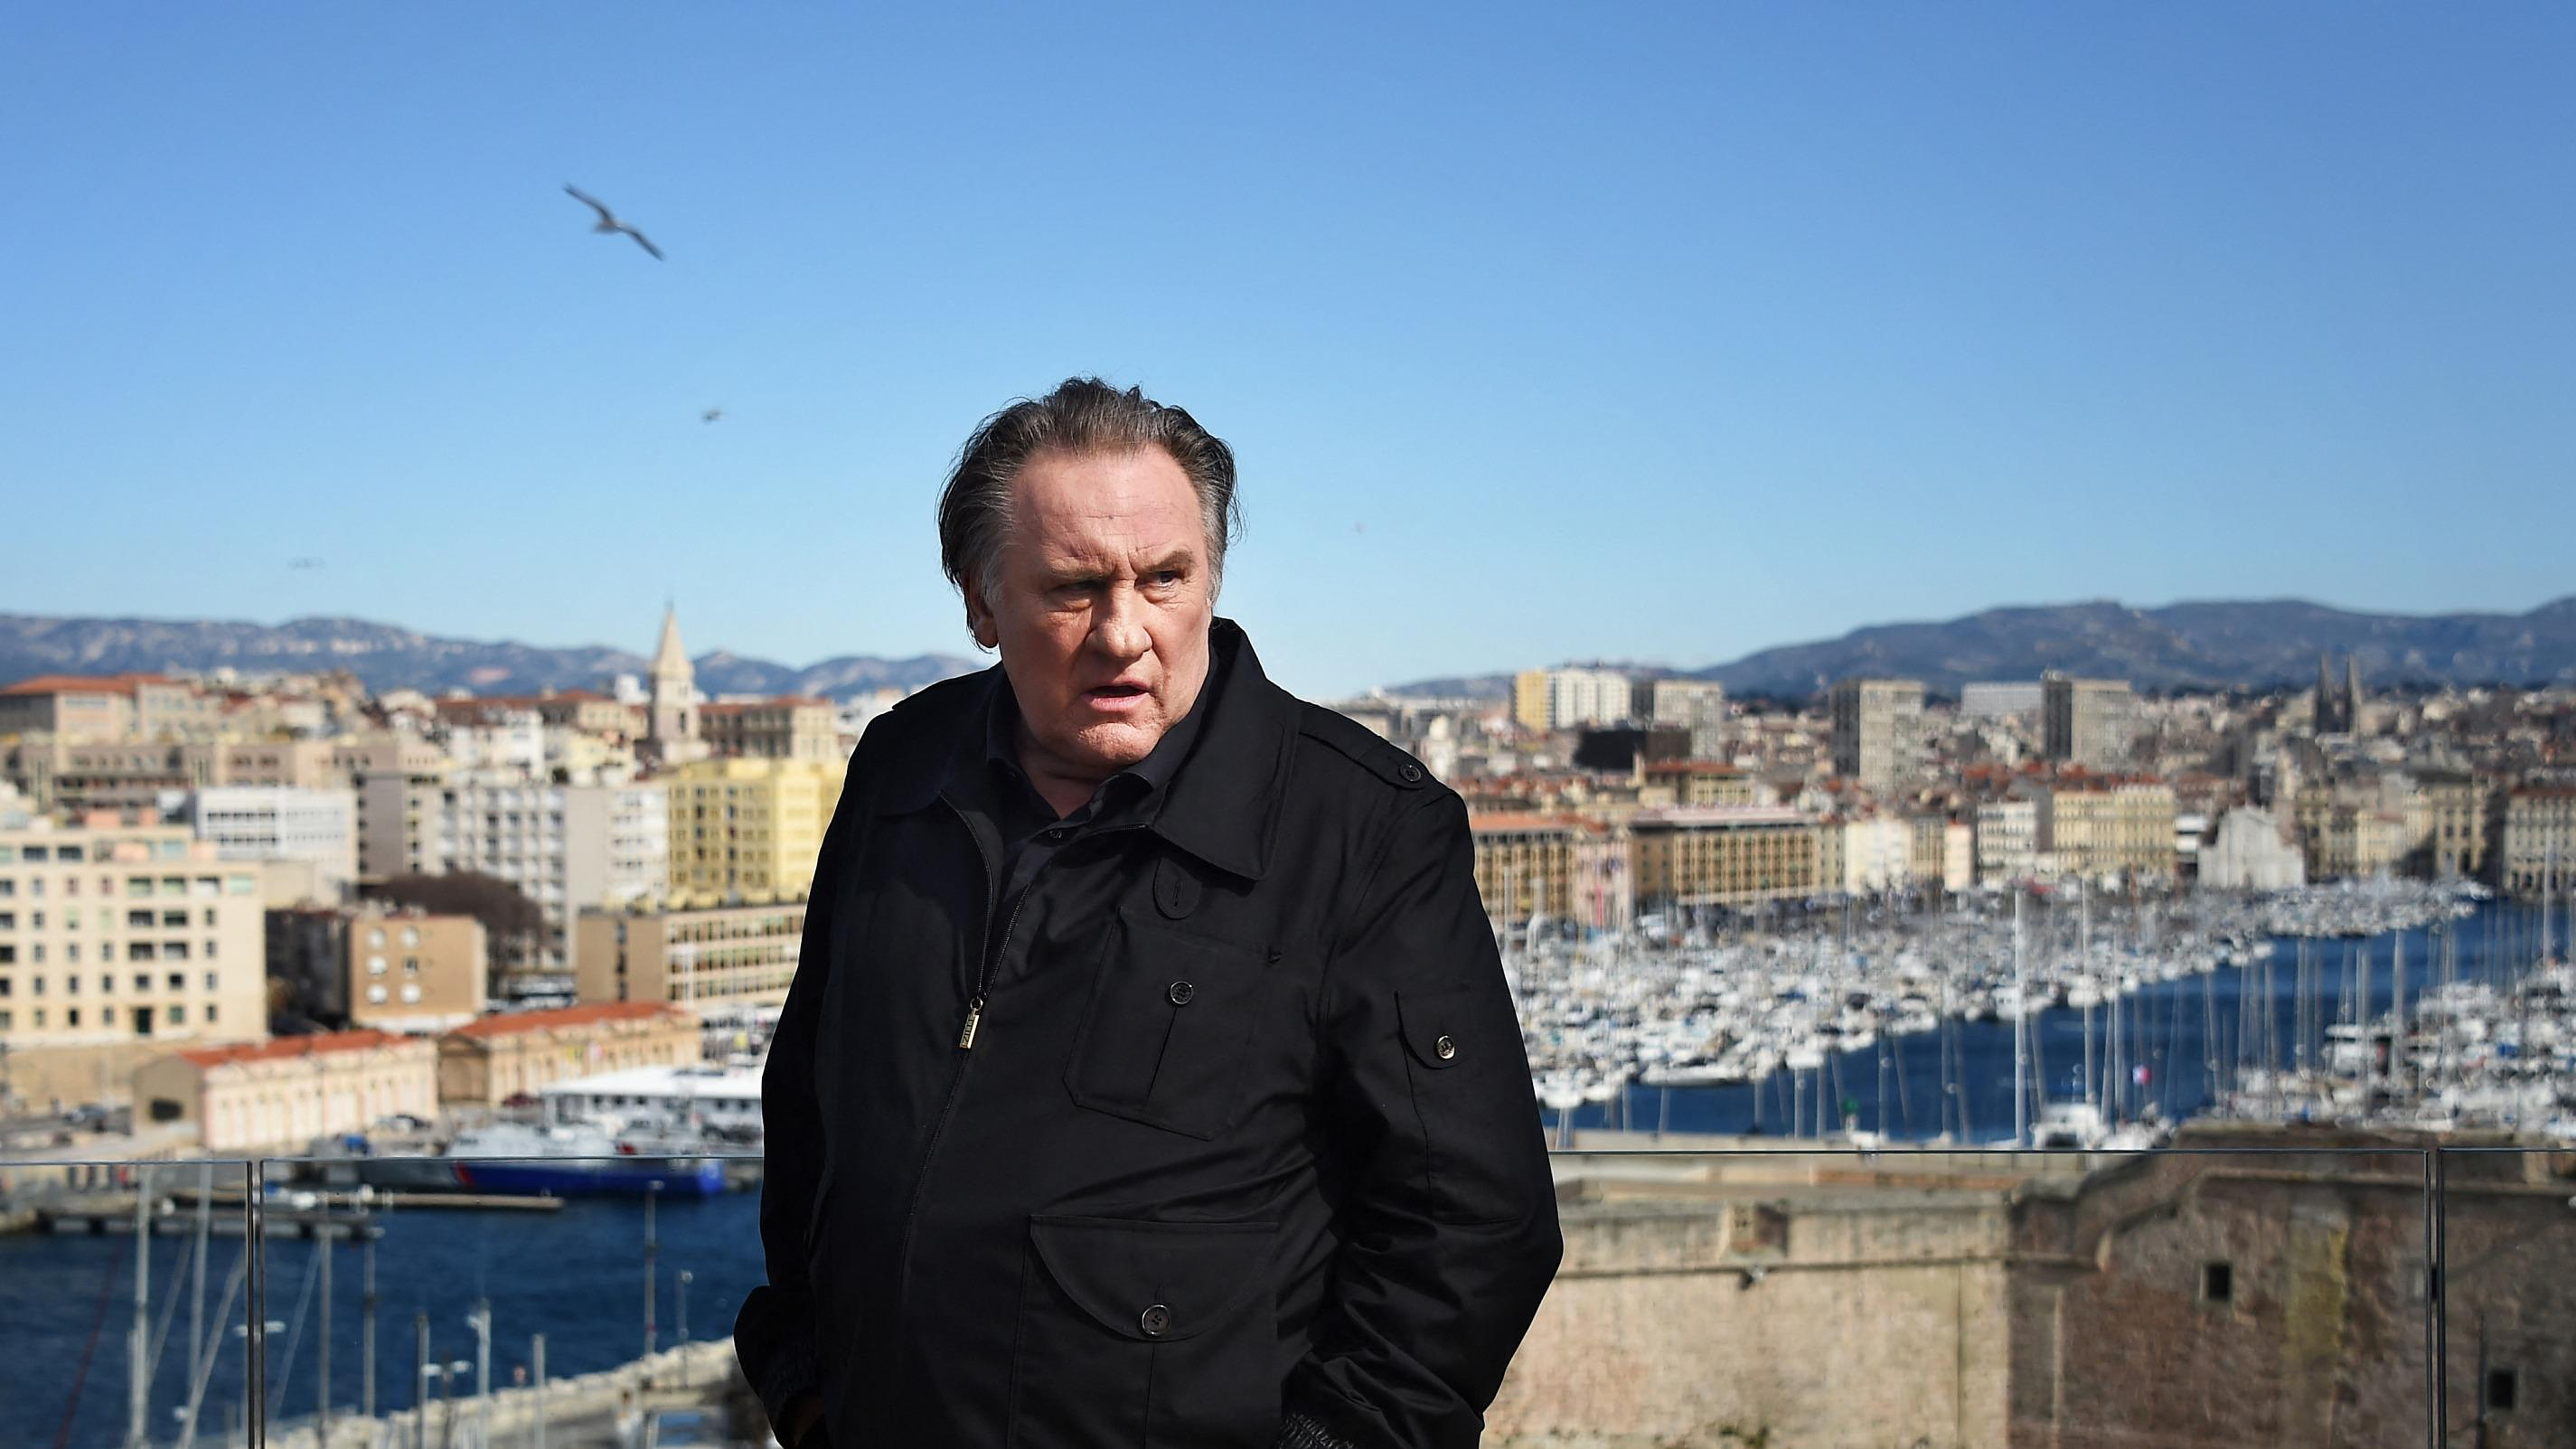 Gérard Depardieu reappears in vacation images in Dubai